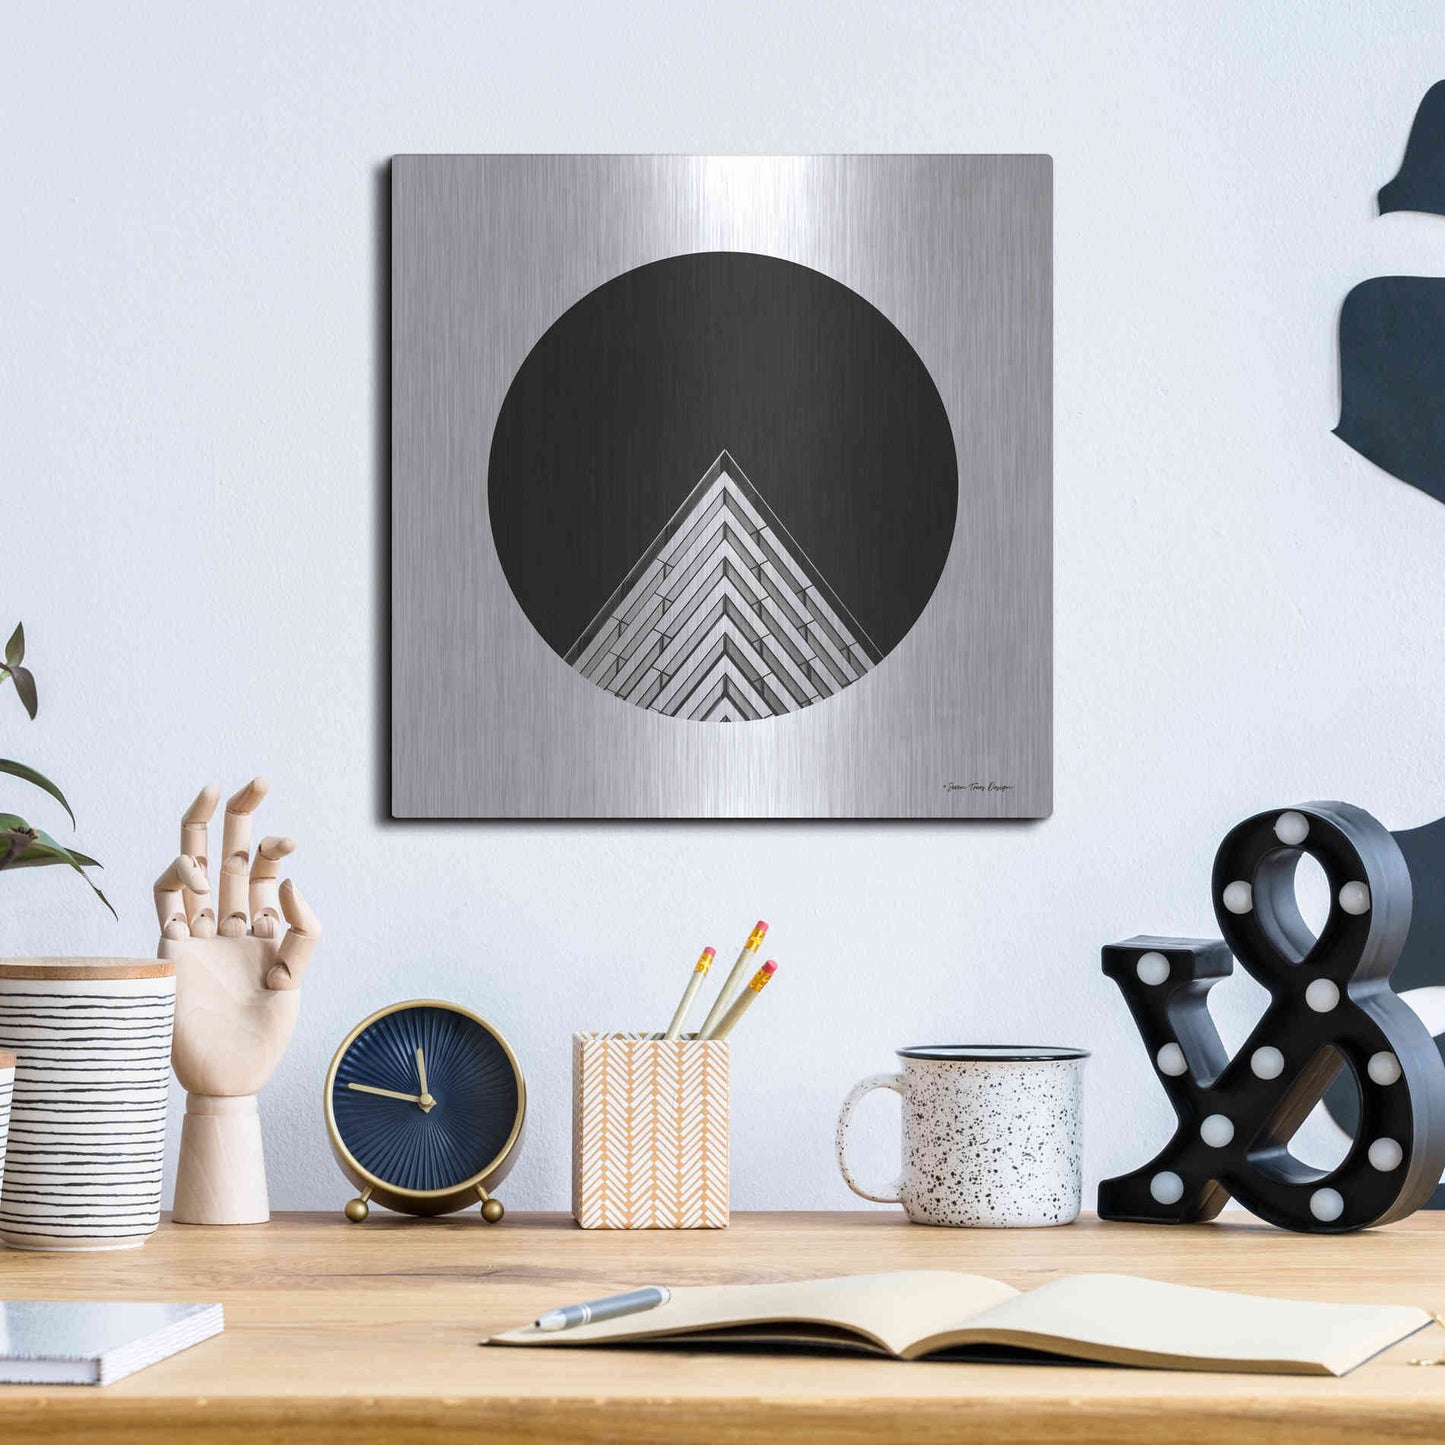 Luxe Metal Art 'Triangular Architecture' by Seven Trees Design, Metal Wall Art,12x12